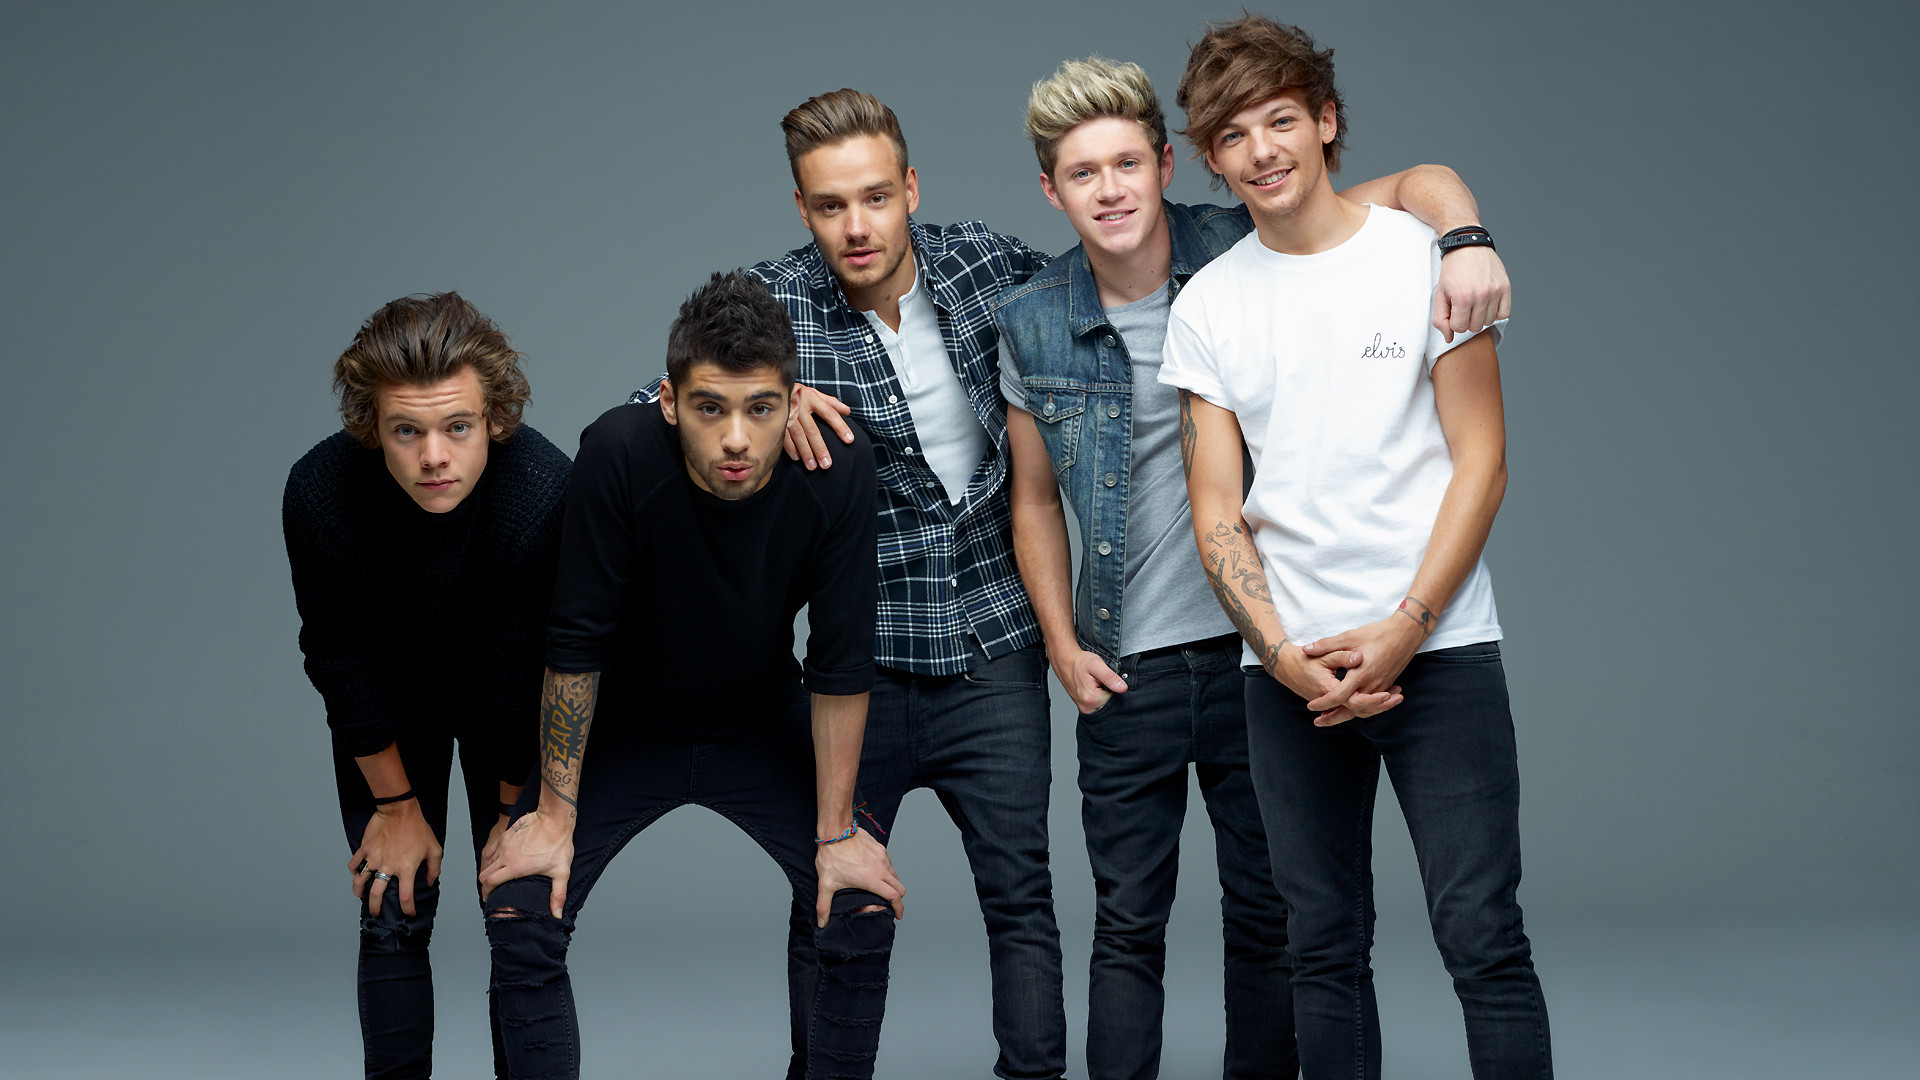 1920x1080 One Direction backdrop wallpaper